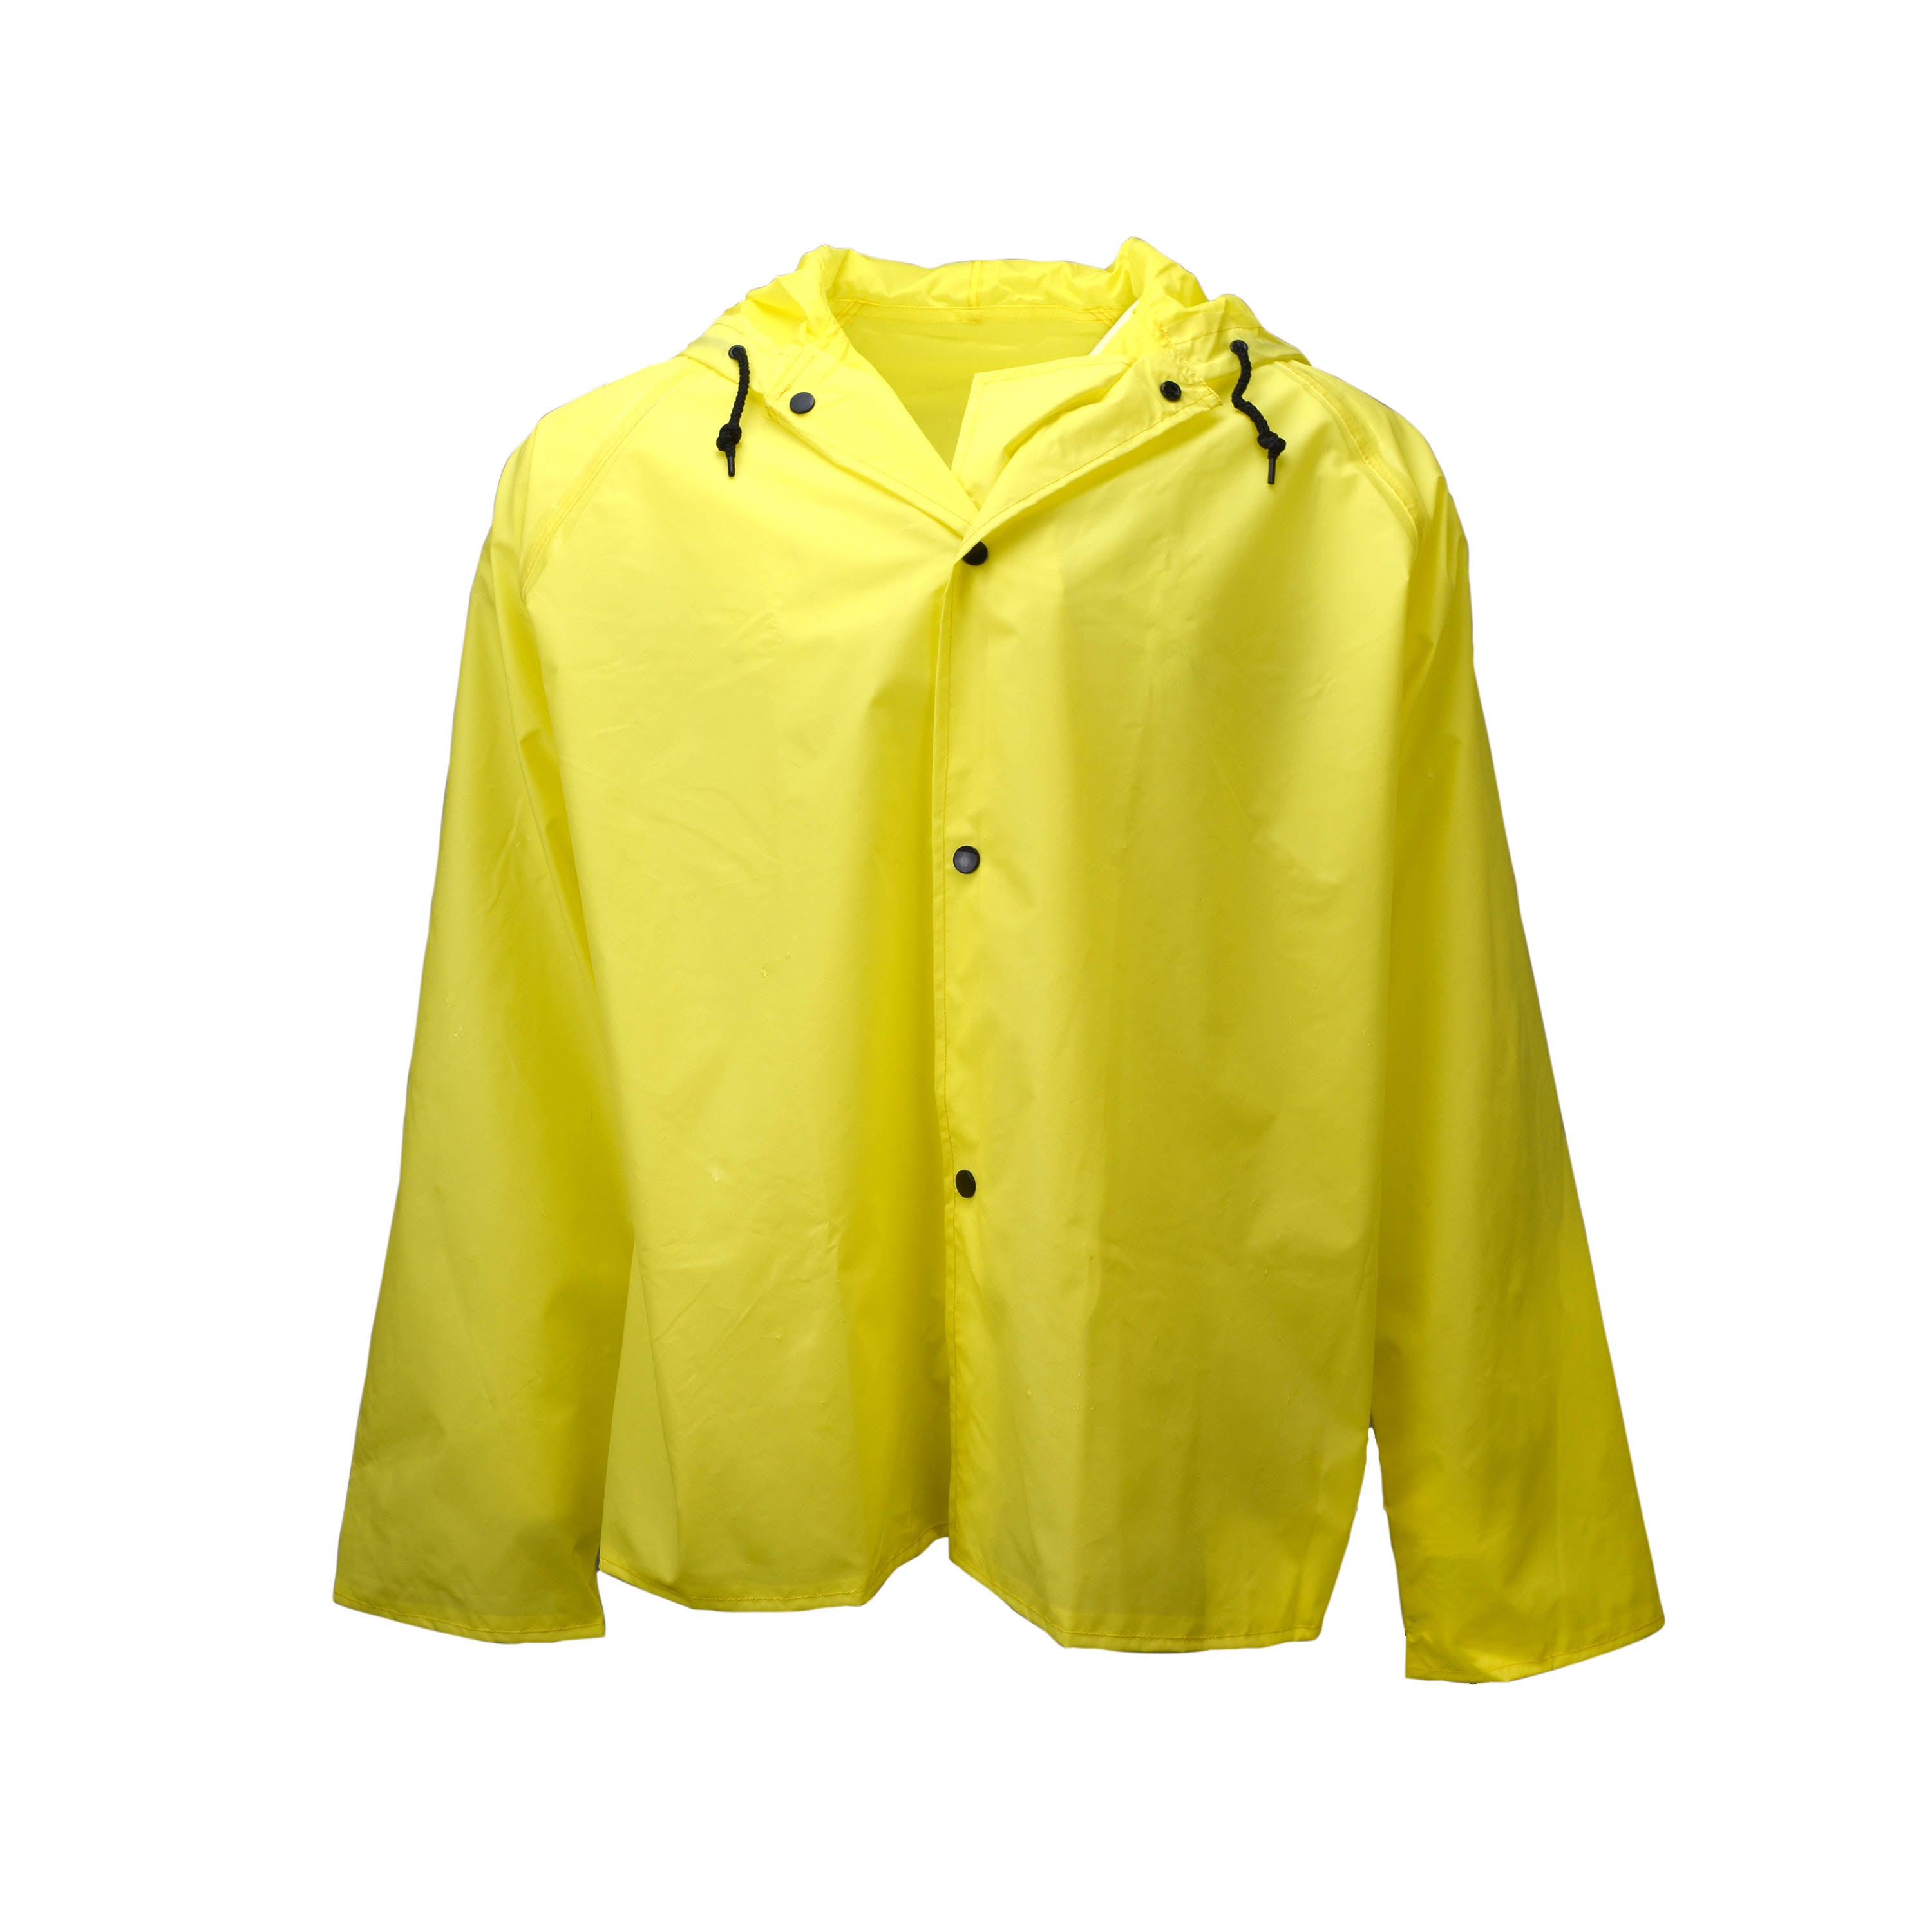 Neese 275AJ Tuff Wear Jacket with Attached Hood